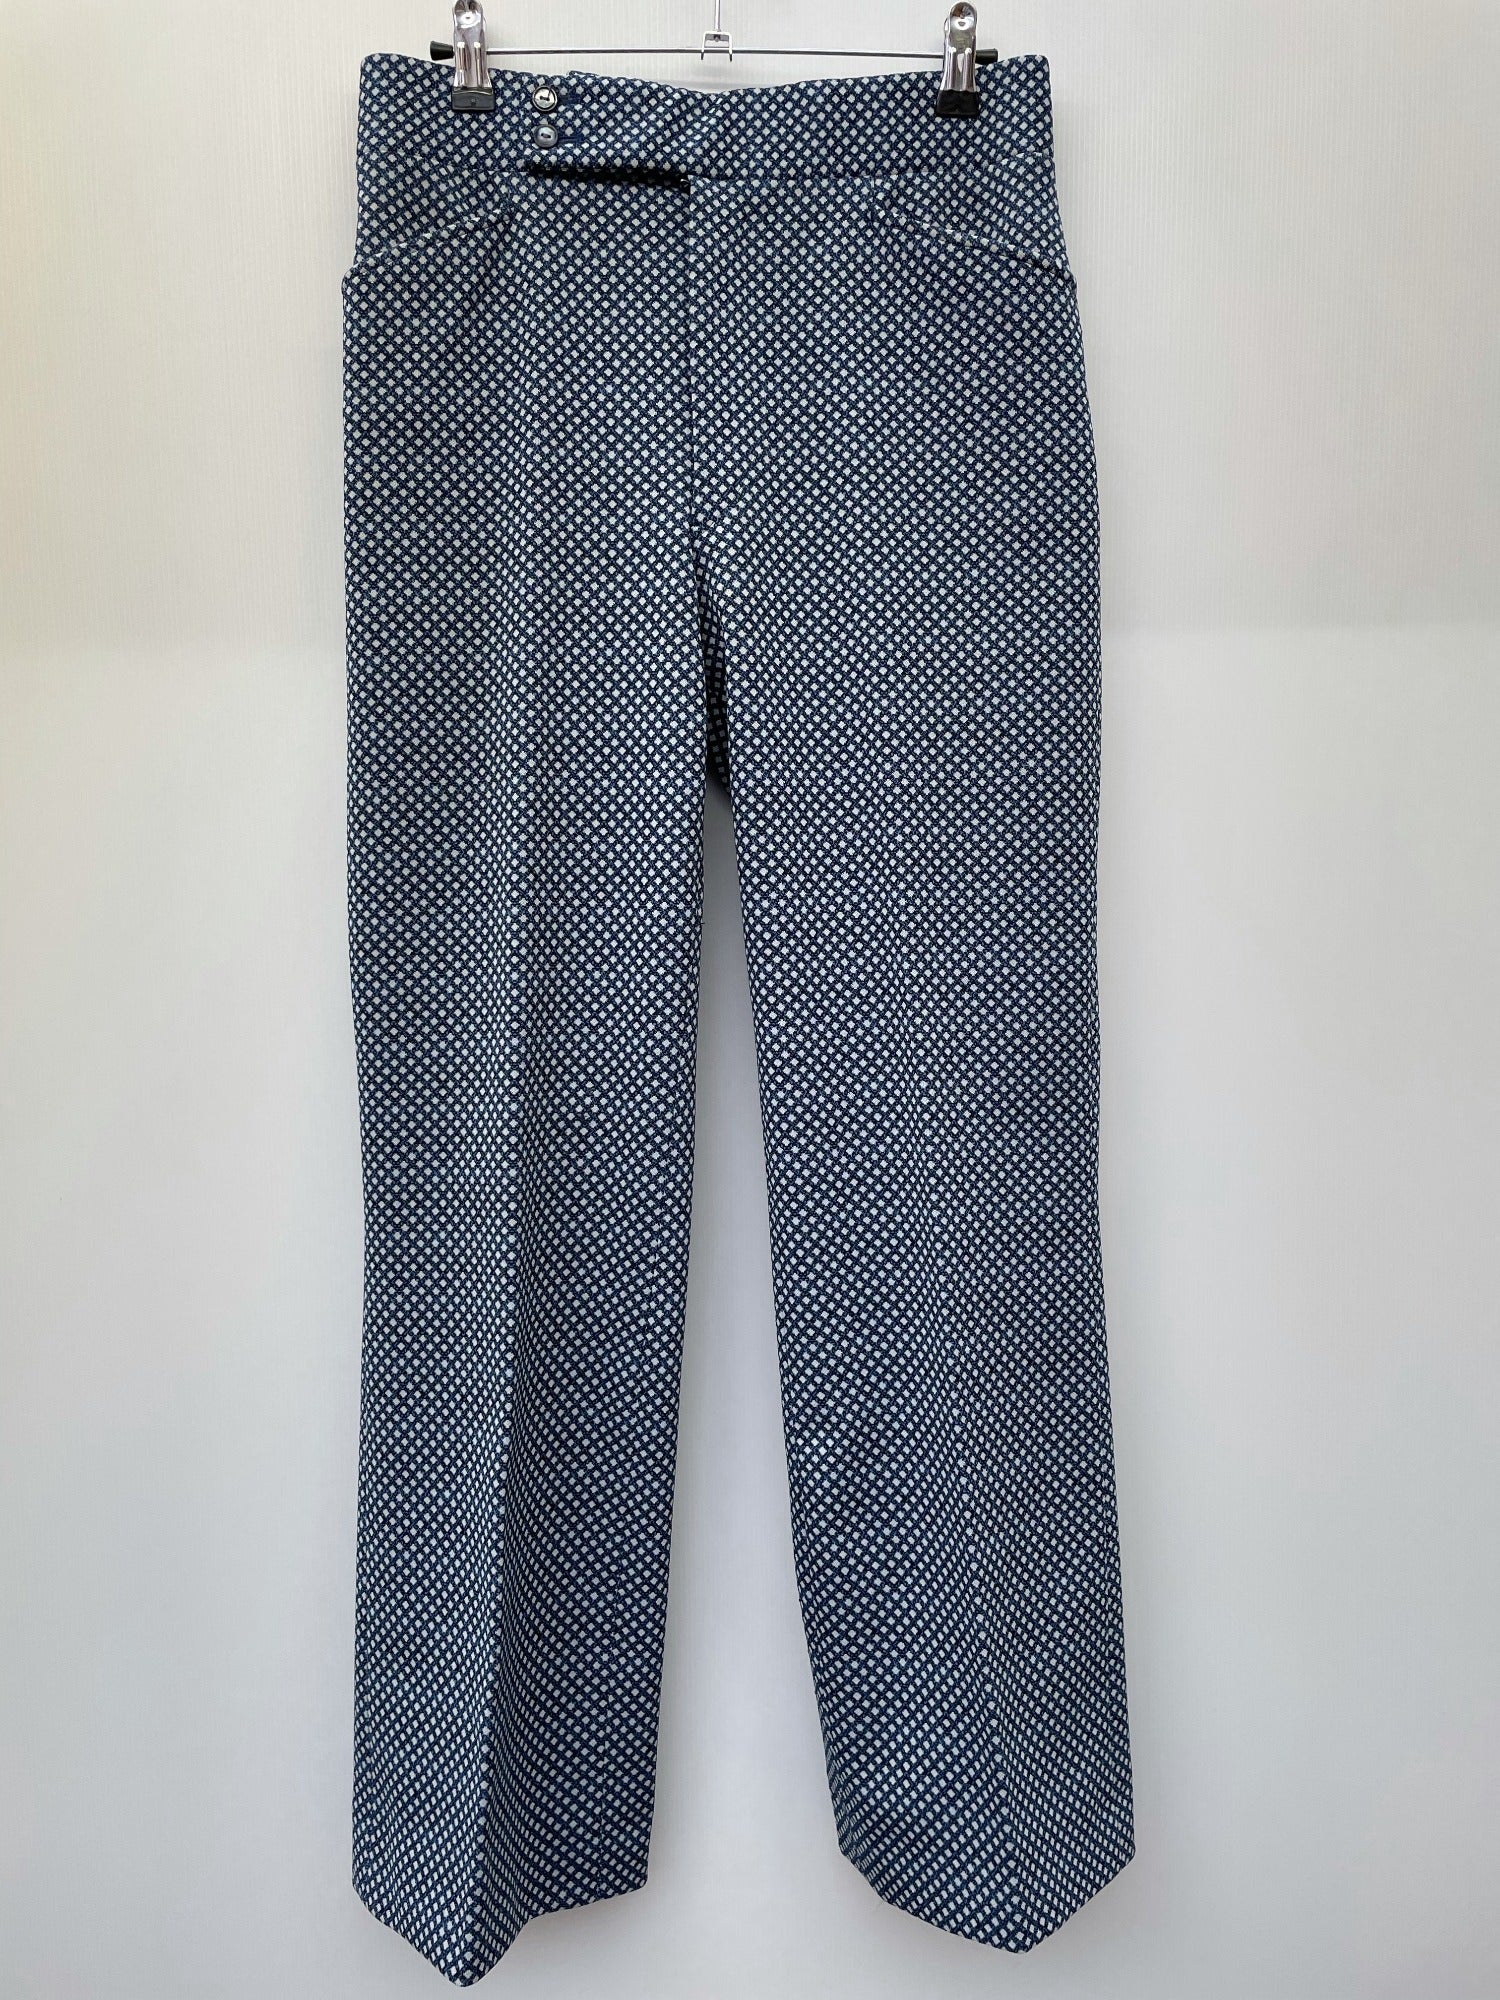 1970's Flared Trousers with Retro Pattern - SIze 28 - Mens Vintage ...